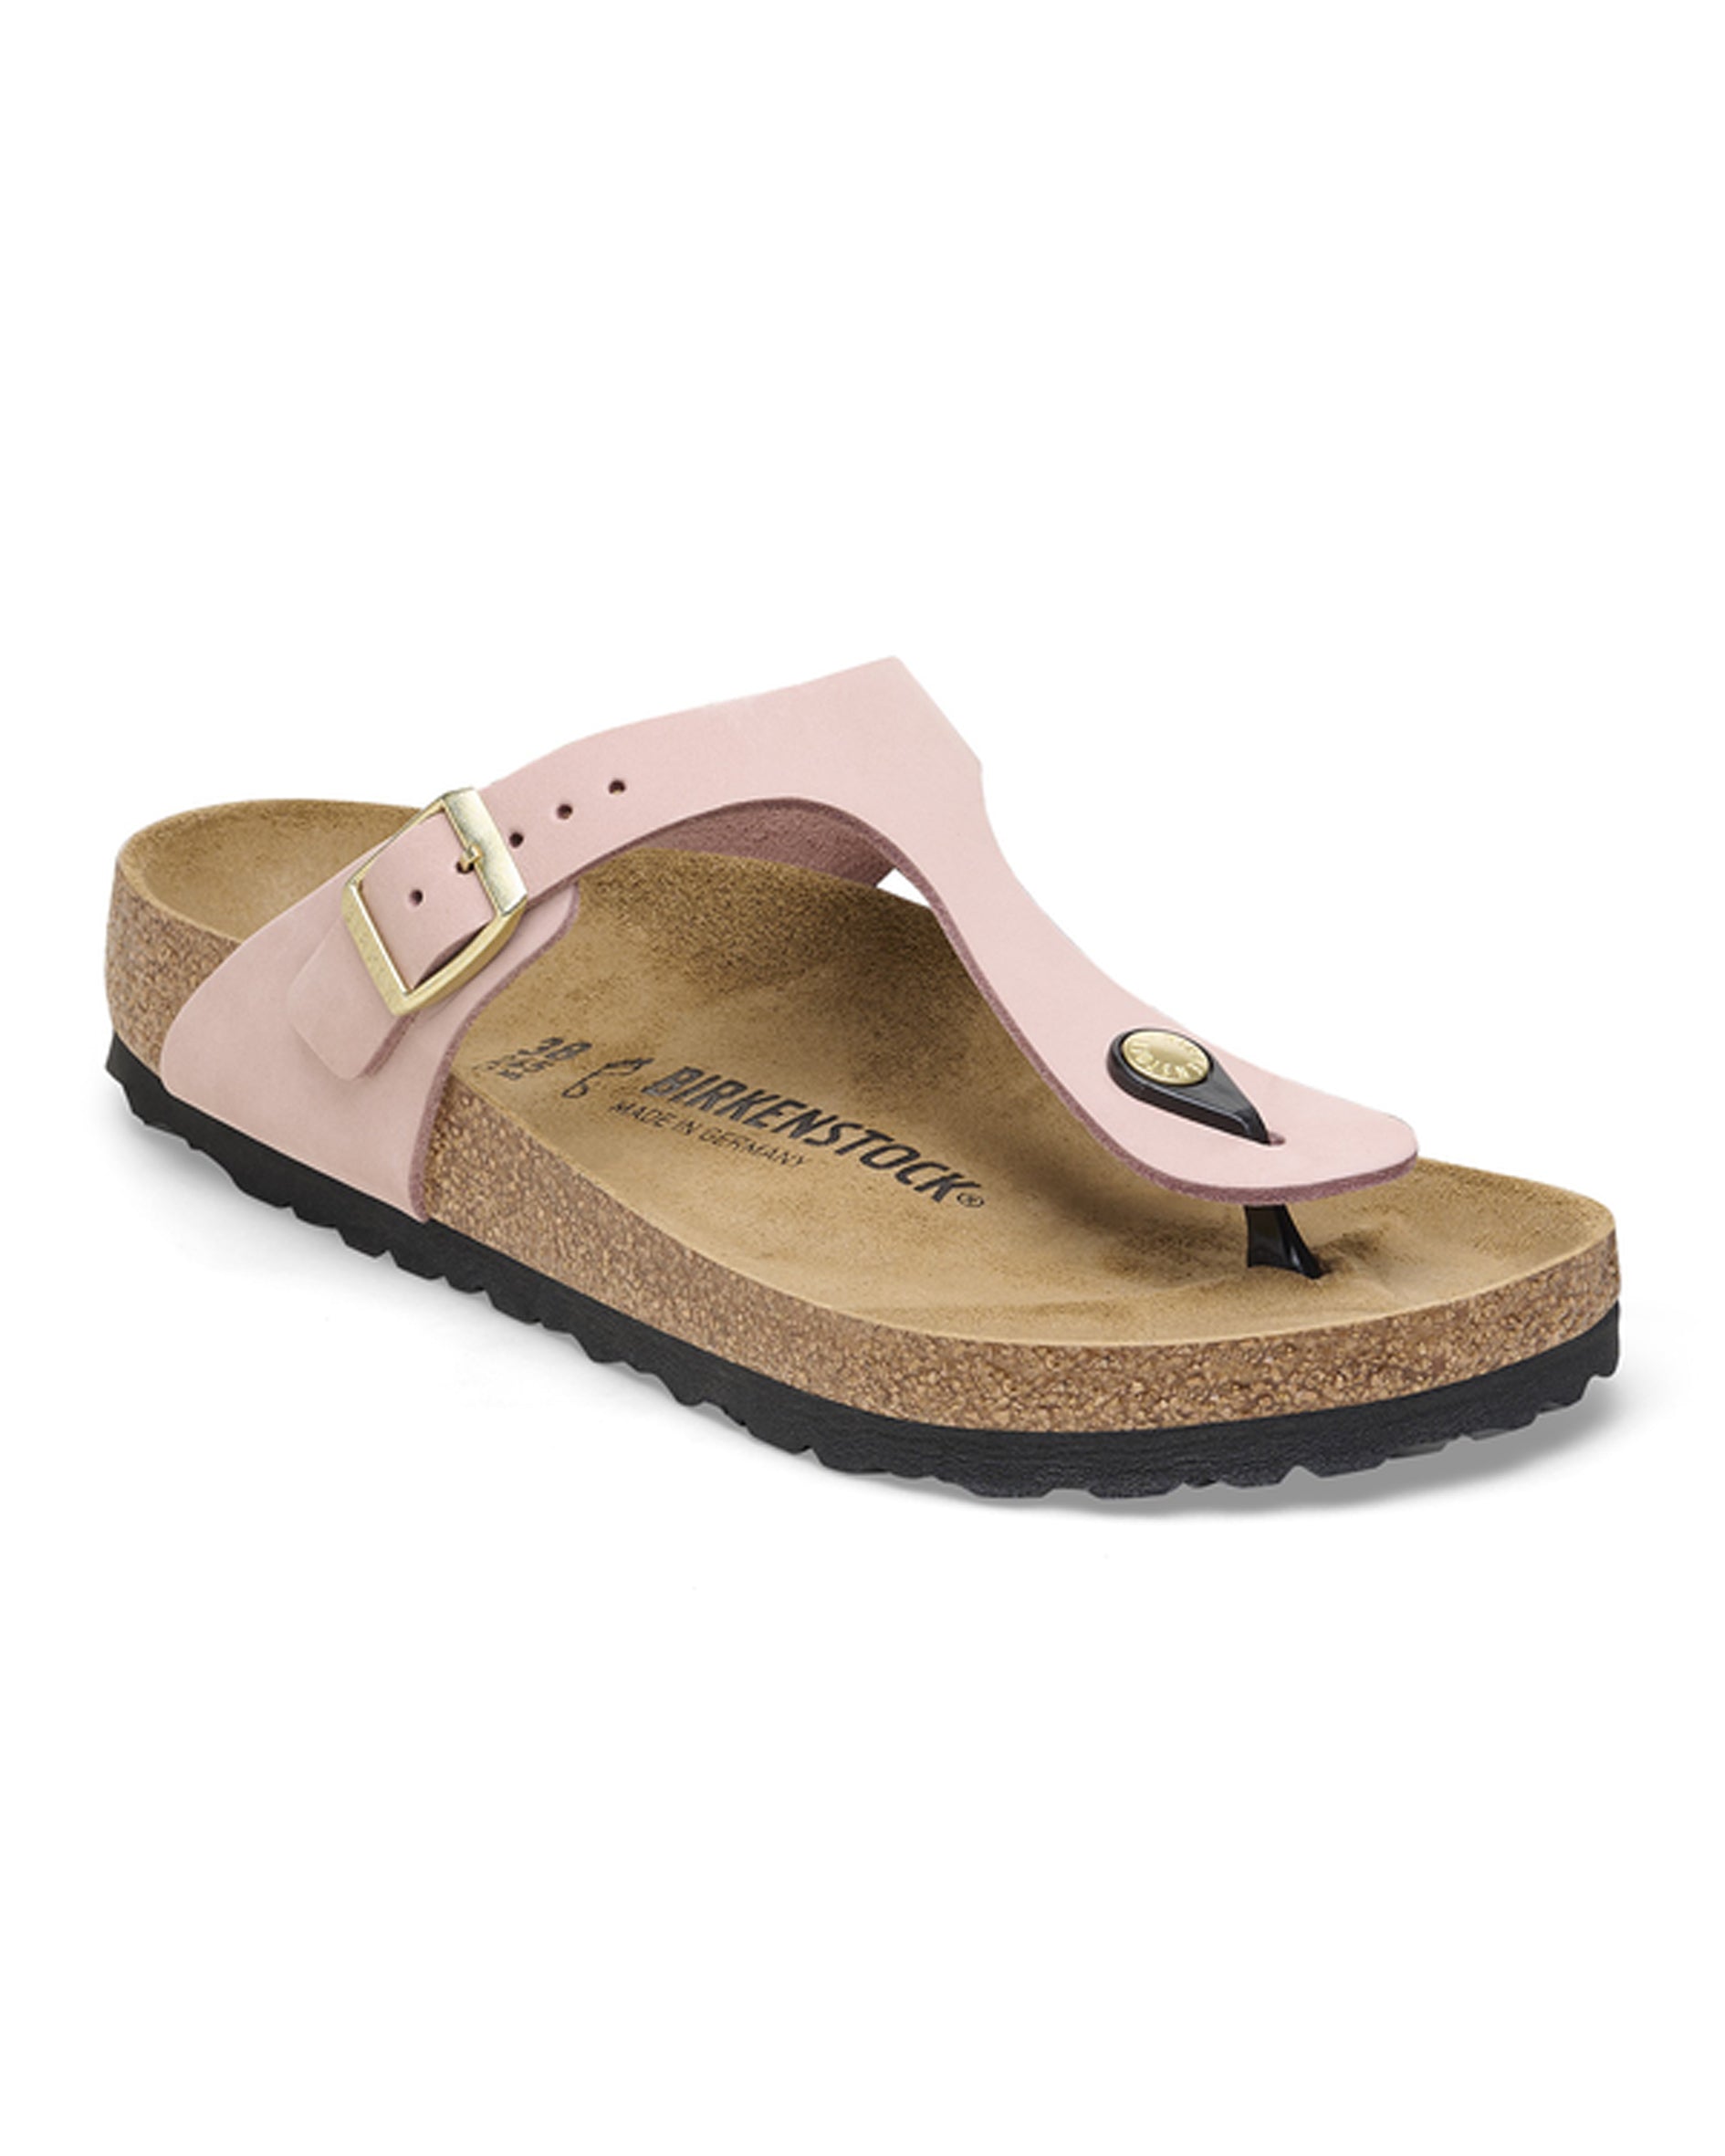 Gizeh Soft Pink Nubuck Leather Sandals